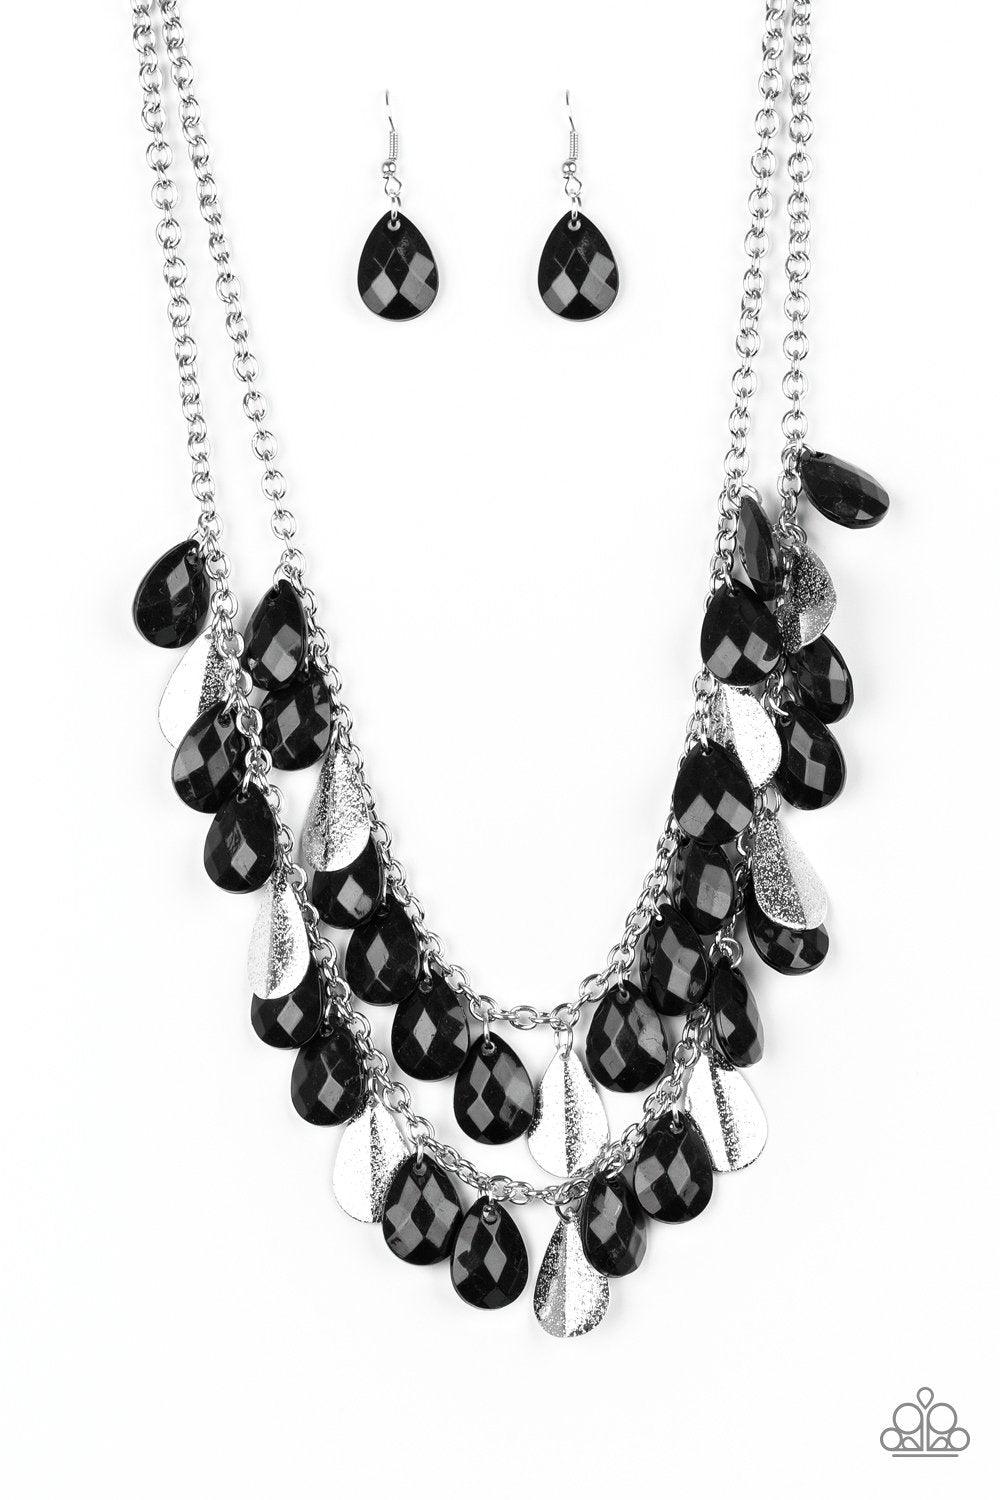 Paparazzi Accessories Life of the FIESTA - Black Two strands of silver chain are decorated in a flirtatious fringe of faceted black teardrops. Glittery beveled silver teardrops are sprinkled between the black beading, adding hints of shimmer to the vibran